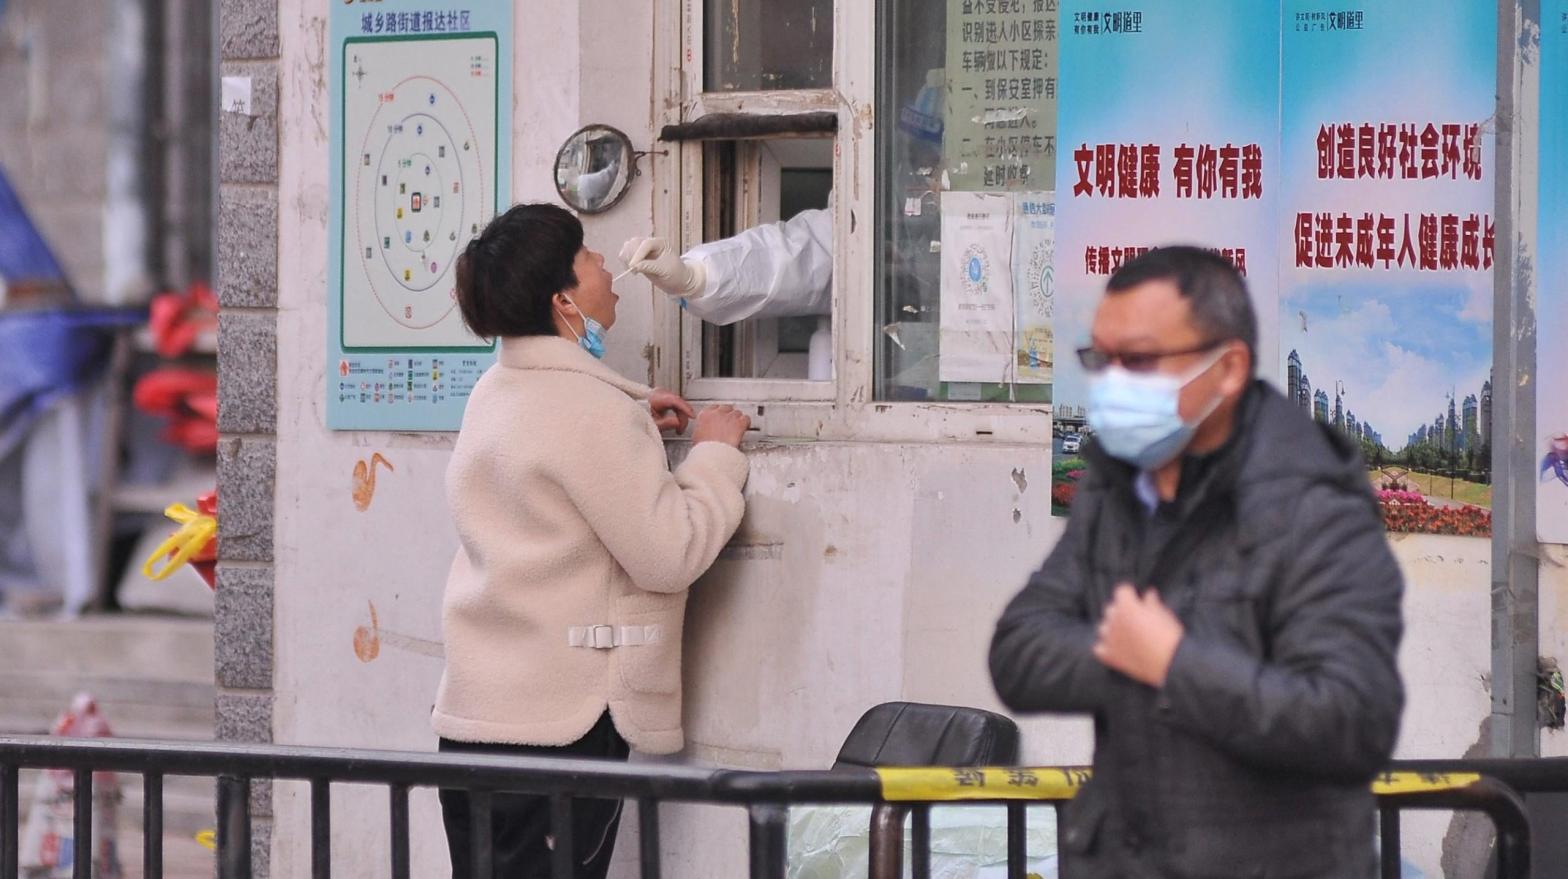 A medical worker takes a swab sample from a resident in Harbin, in China's northern Heilongjiang province on November 3, 2021.  (Photo: STR / AFP, Getty Images)